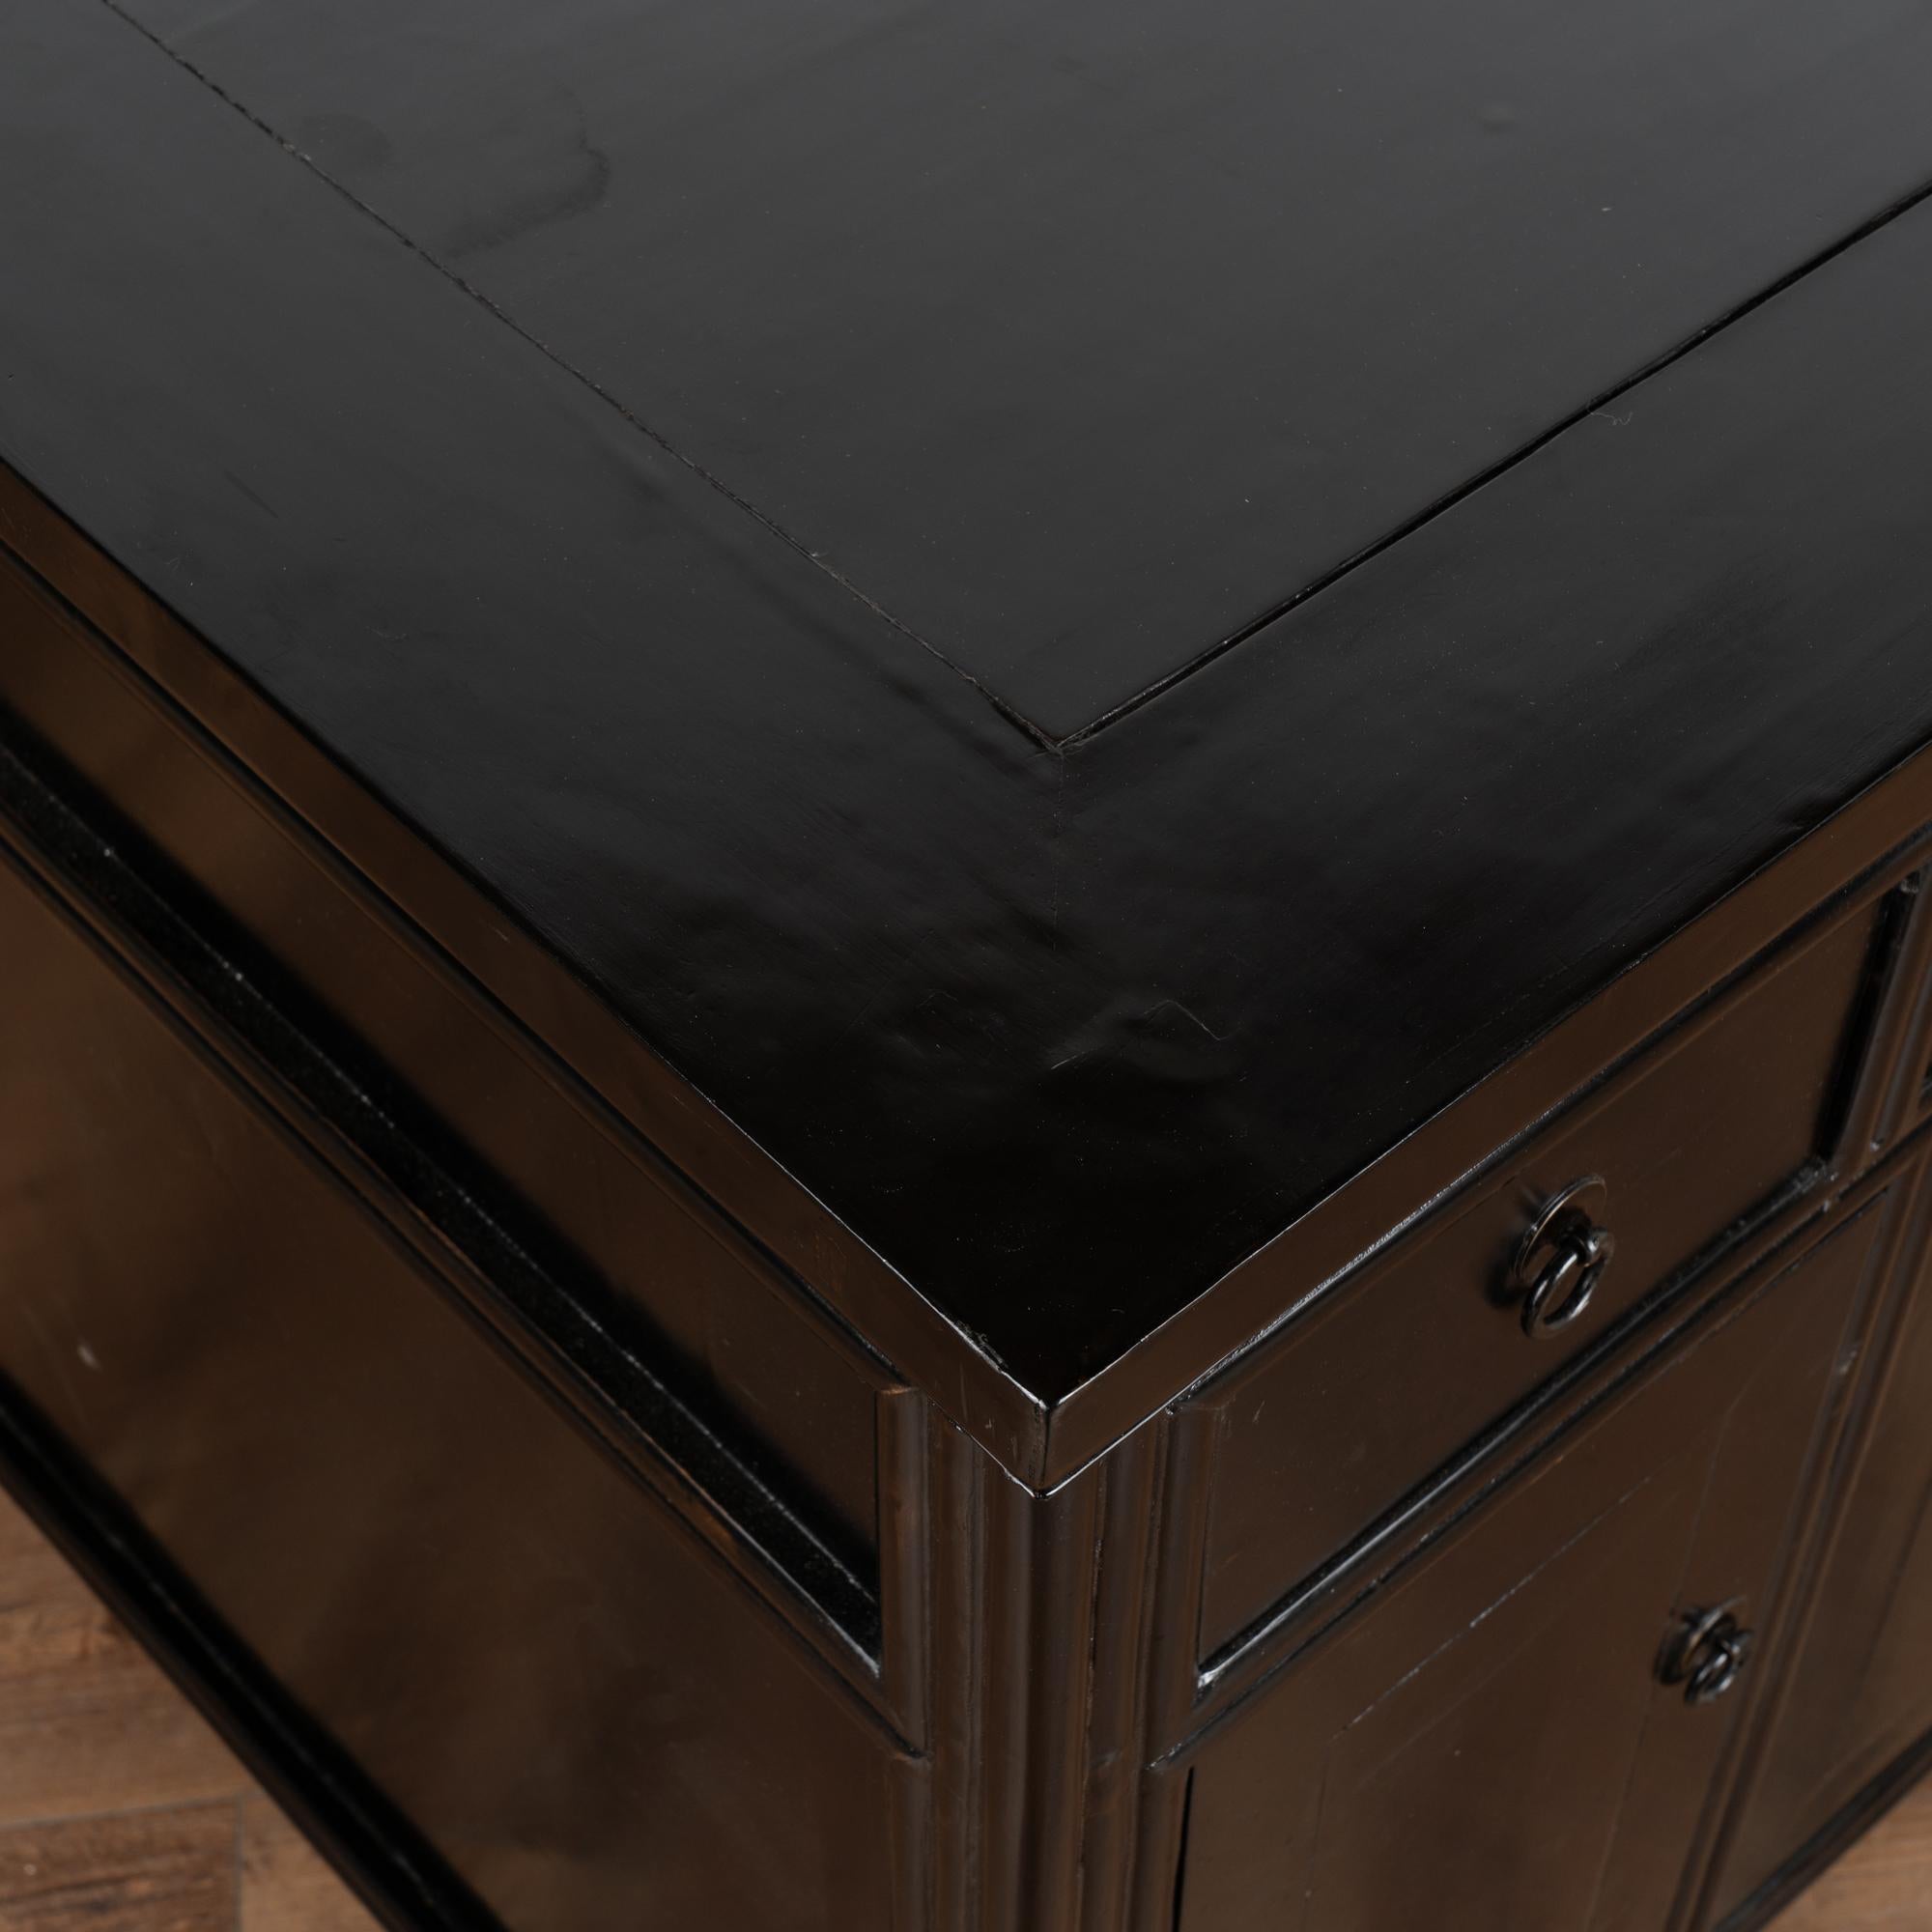 Black Lacquered Free Standing Console Cabinet or Kitchen Island, China 1880 1